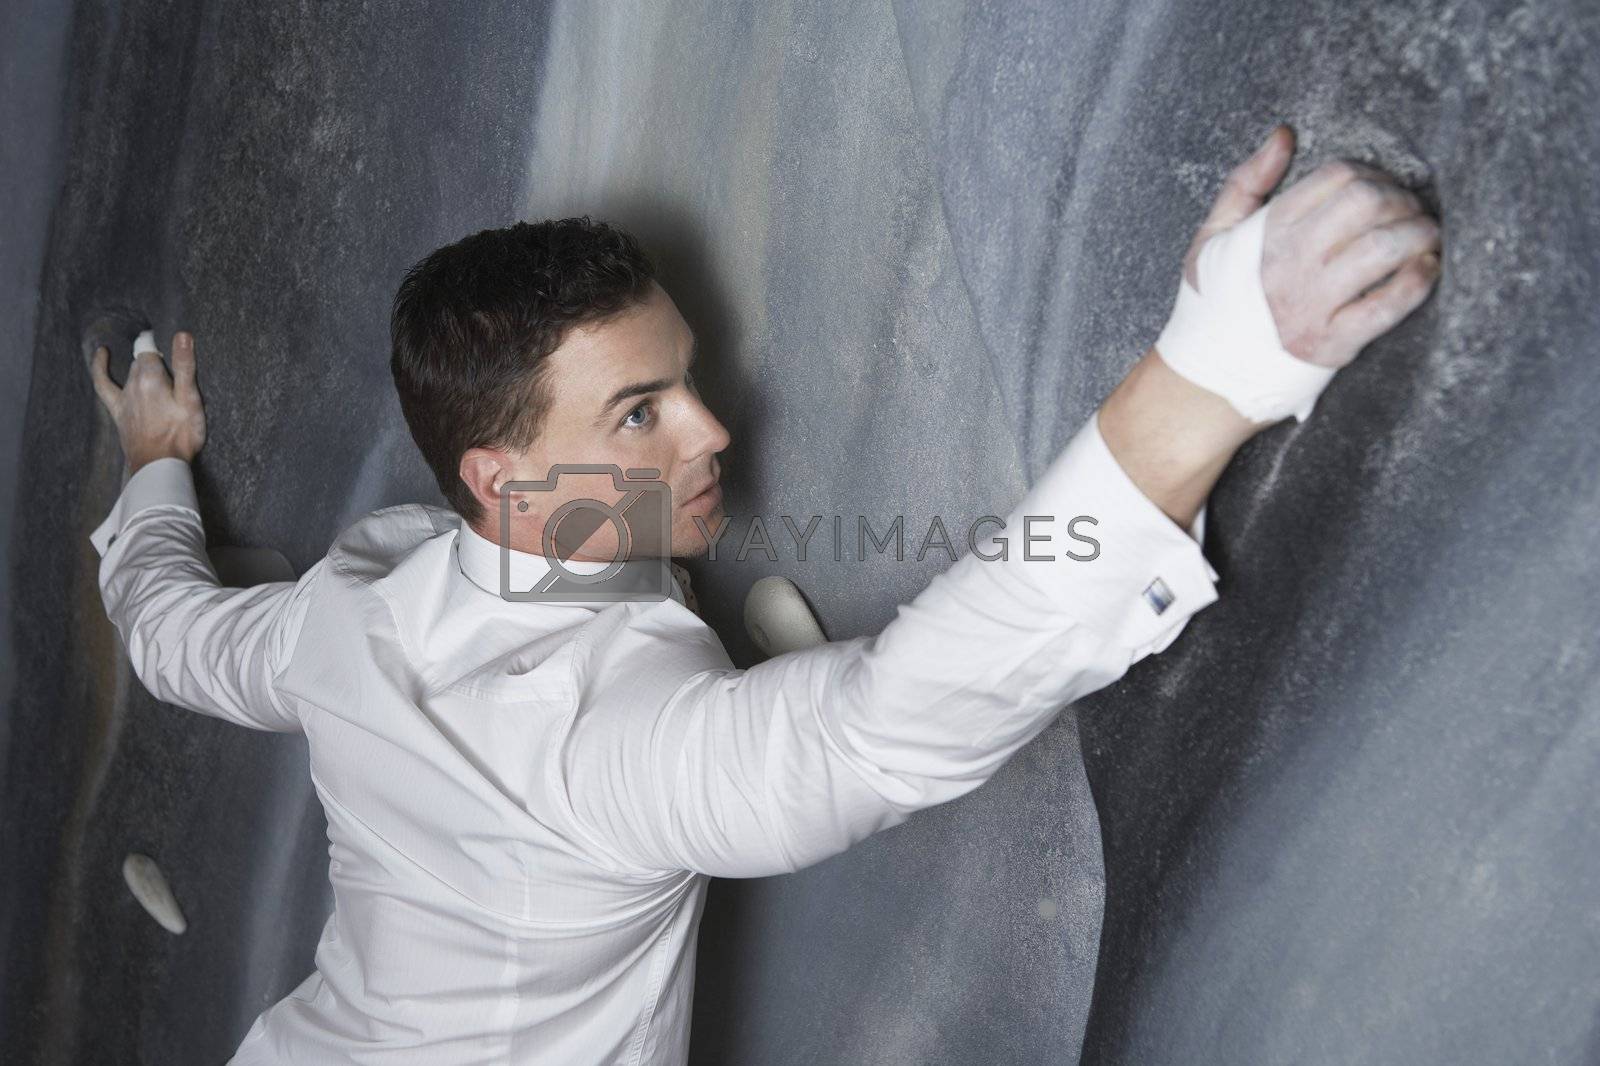 Royalty free image of Businessman Climbing Rock Wall by moodboard